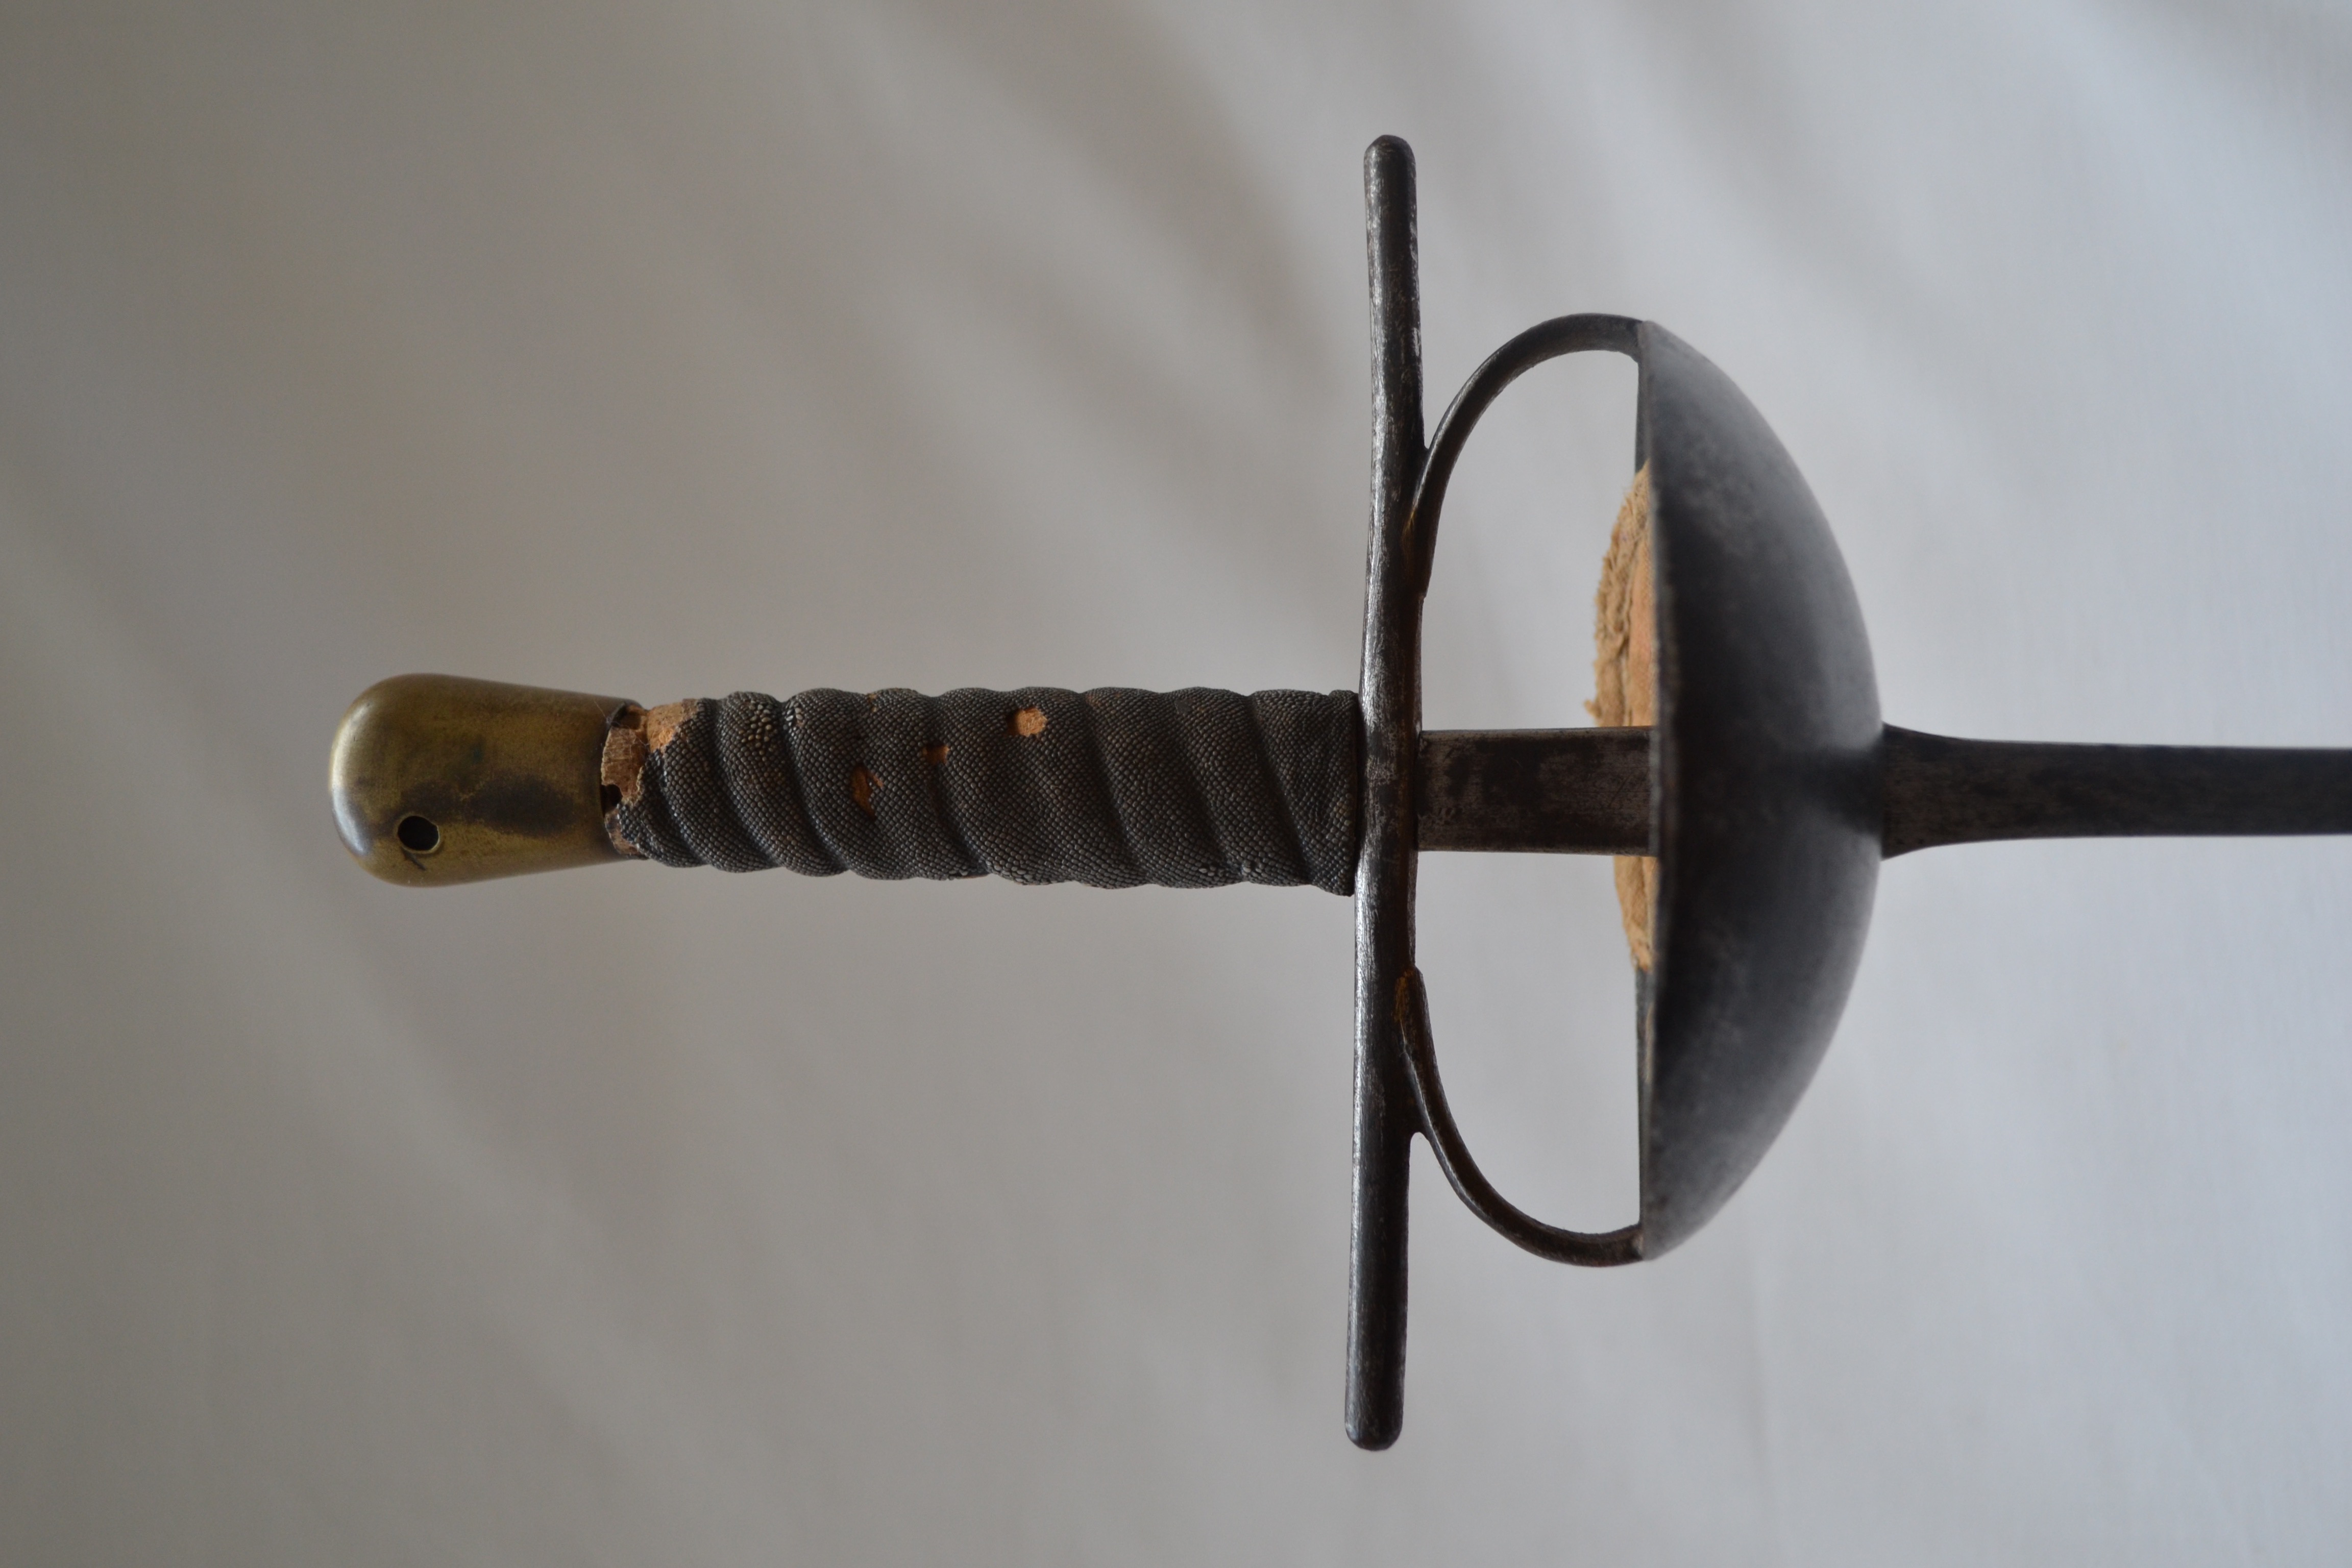 Fig. 16. Smarra (heavy foil), circa, late 1800s. Mounted with Sharkskin grip and a stiff heavy blade 37 inches from guard to point.